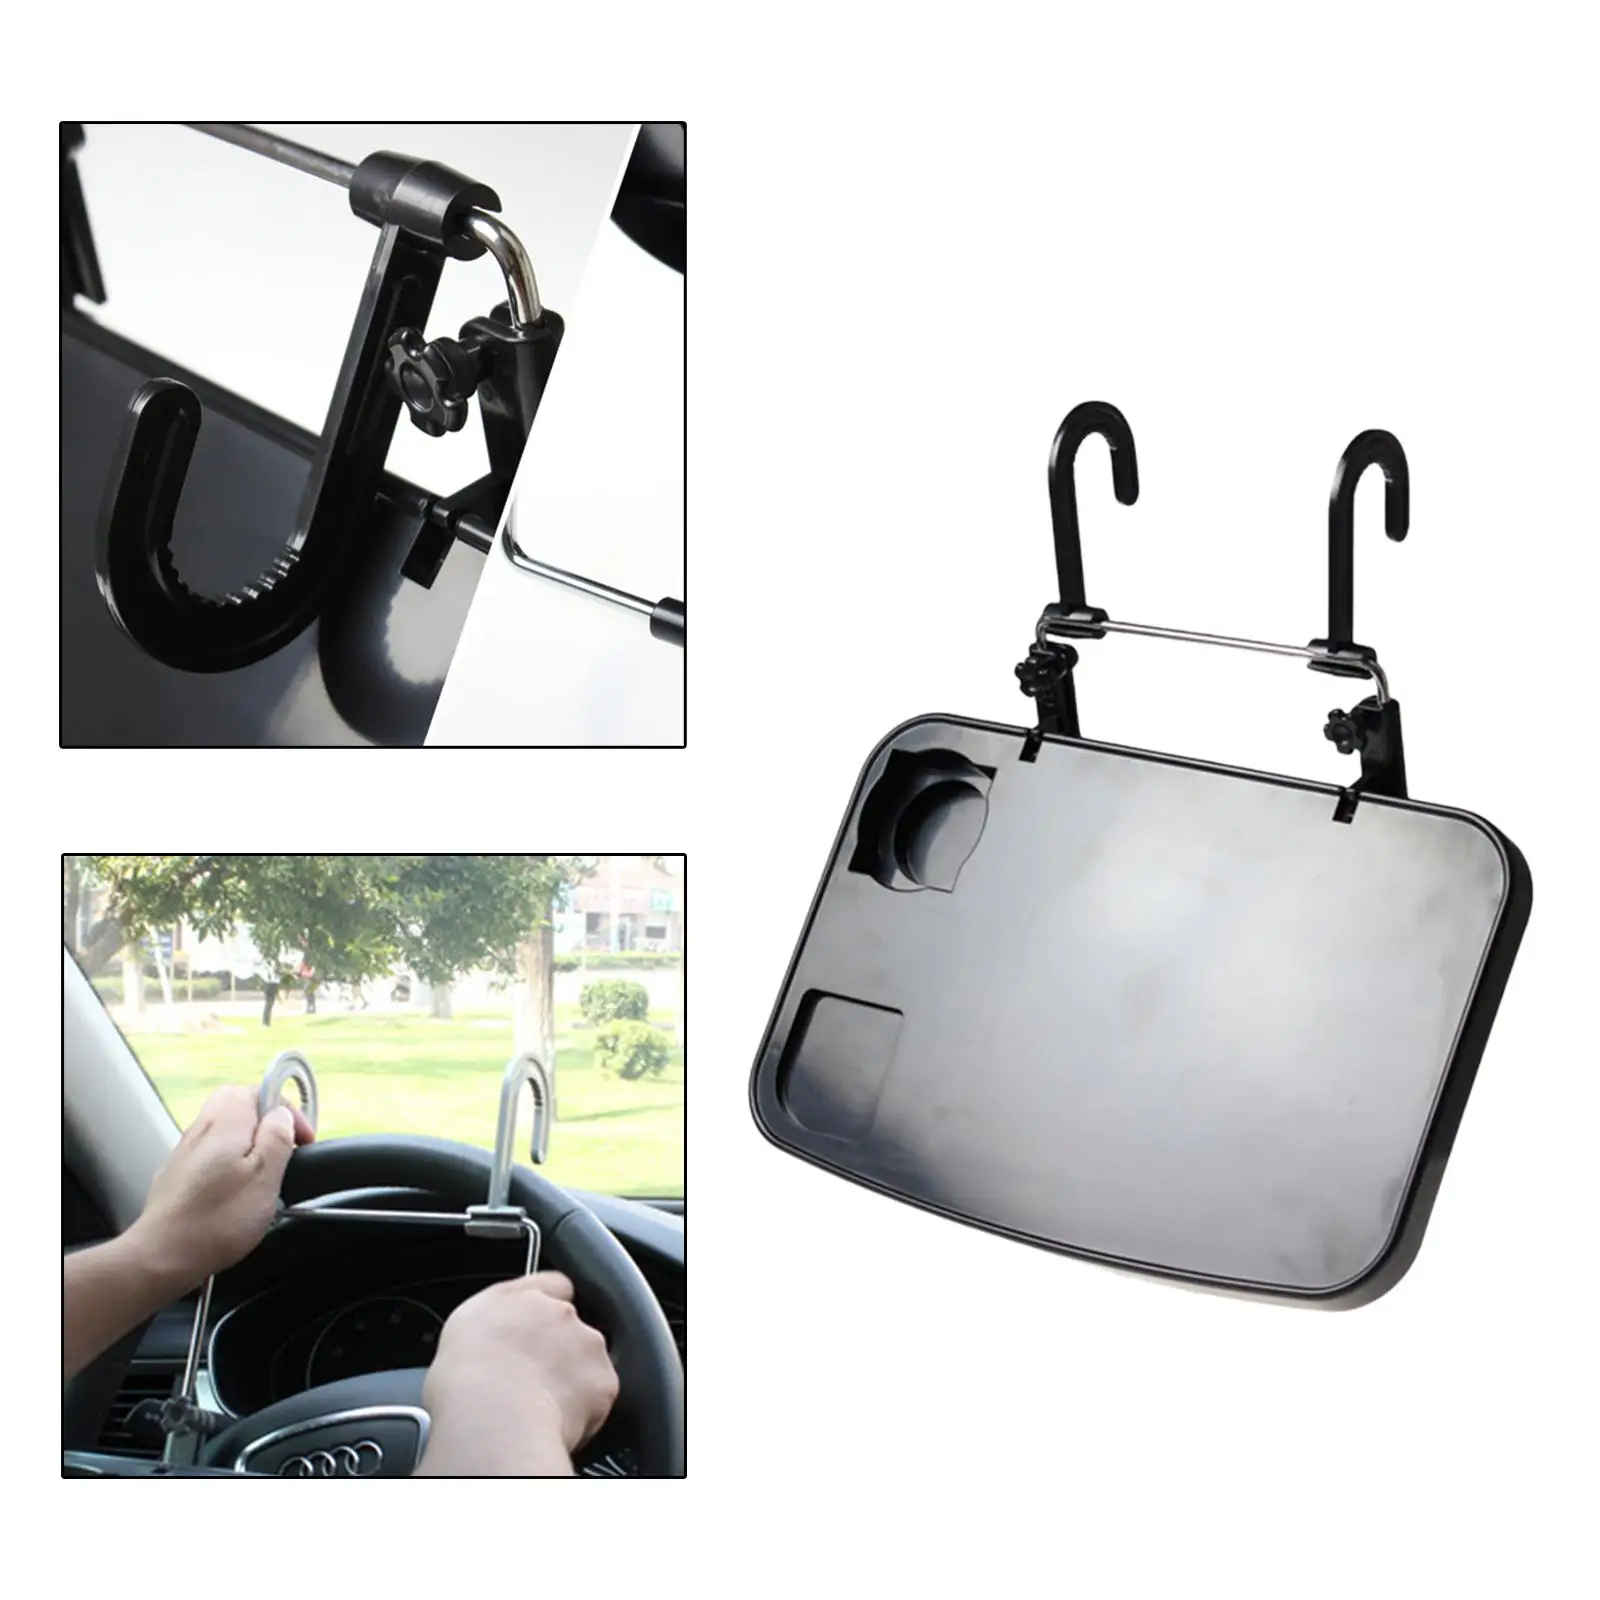 Car Computer Rack Tray Table for Car Travel Vehicles